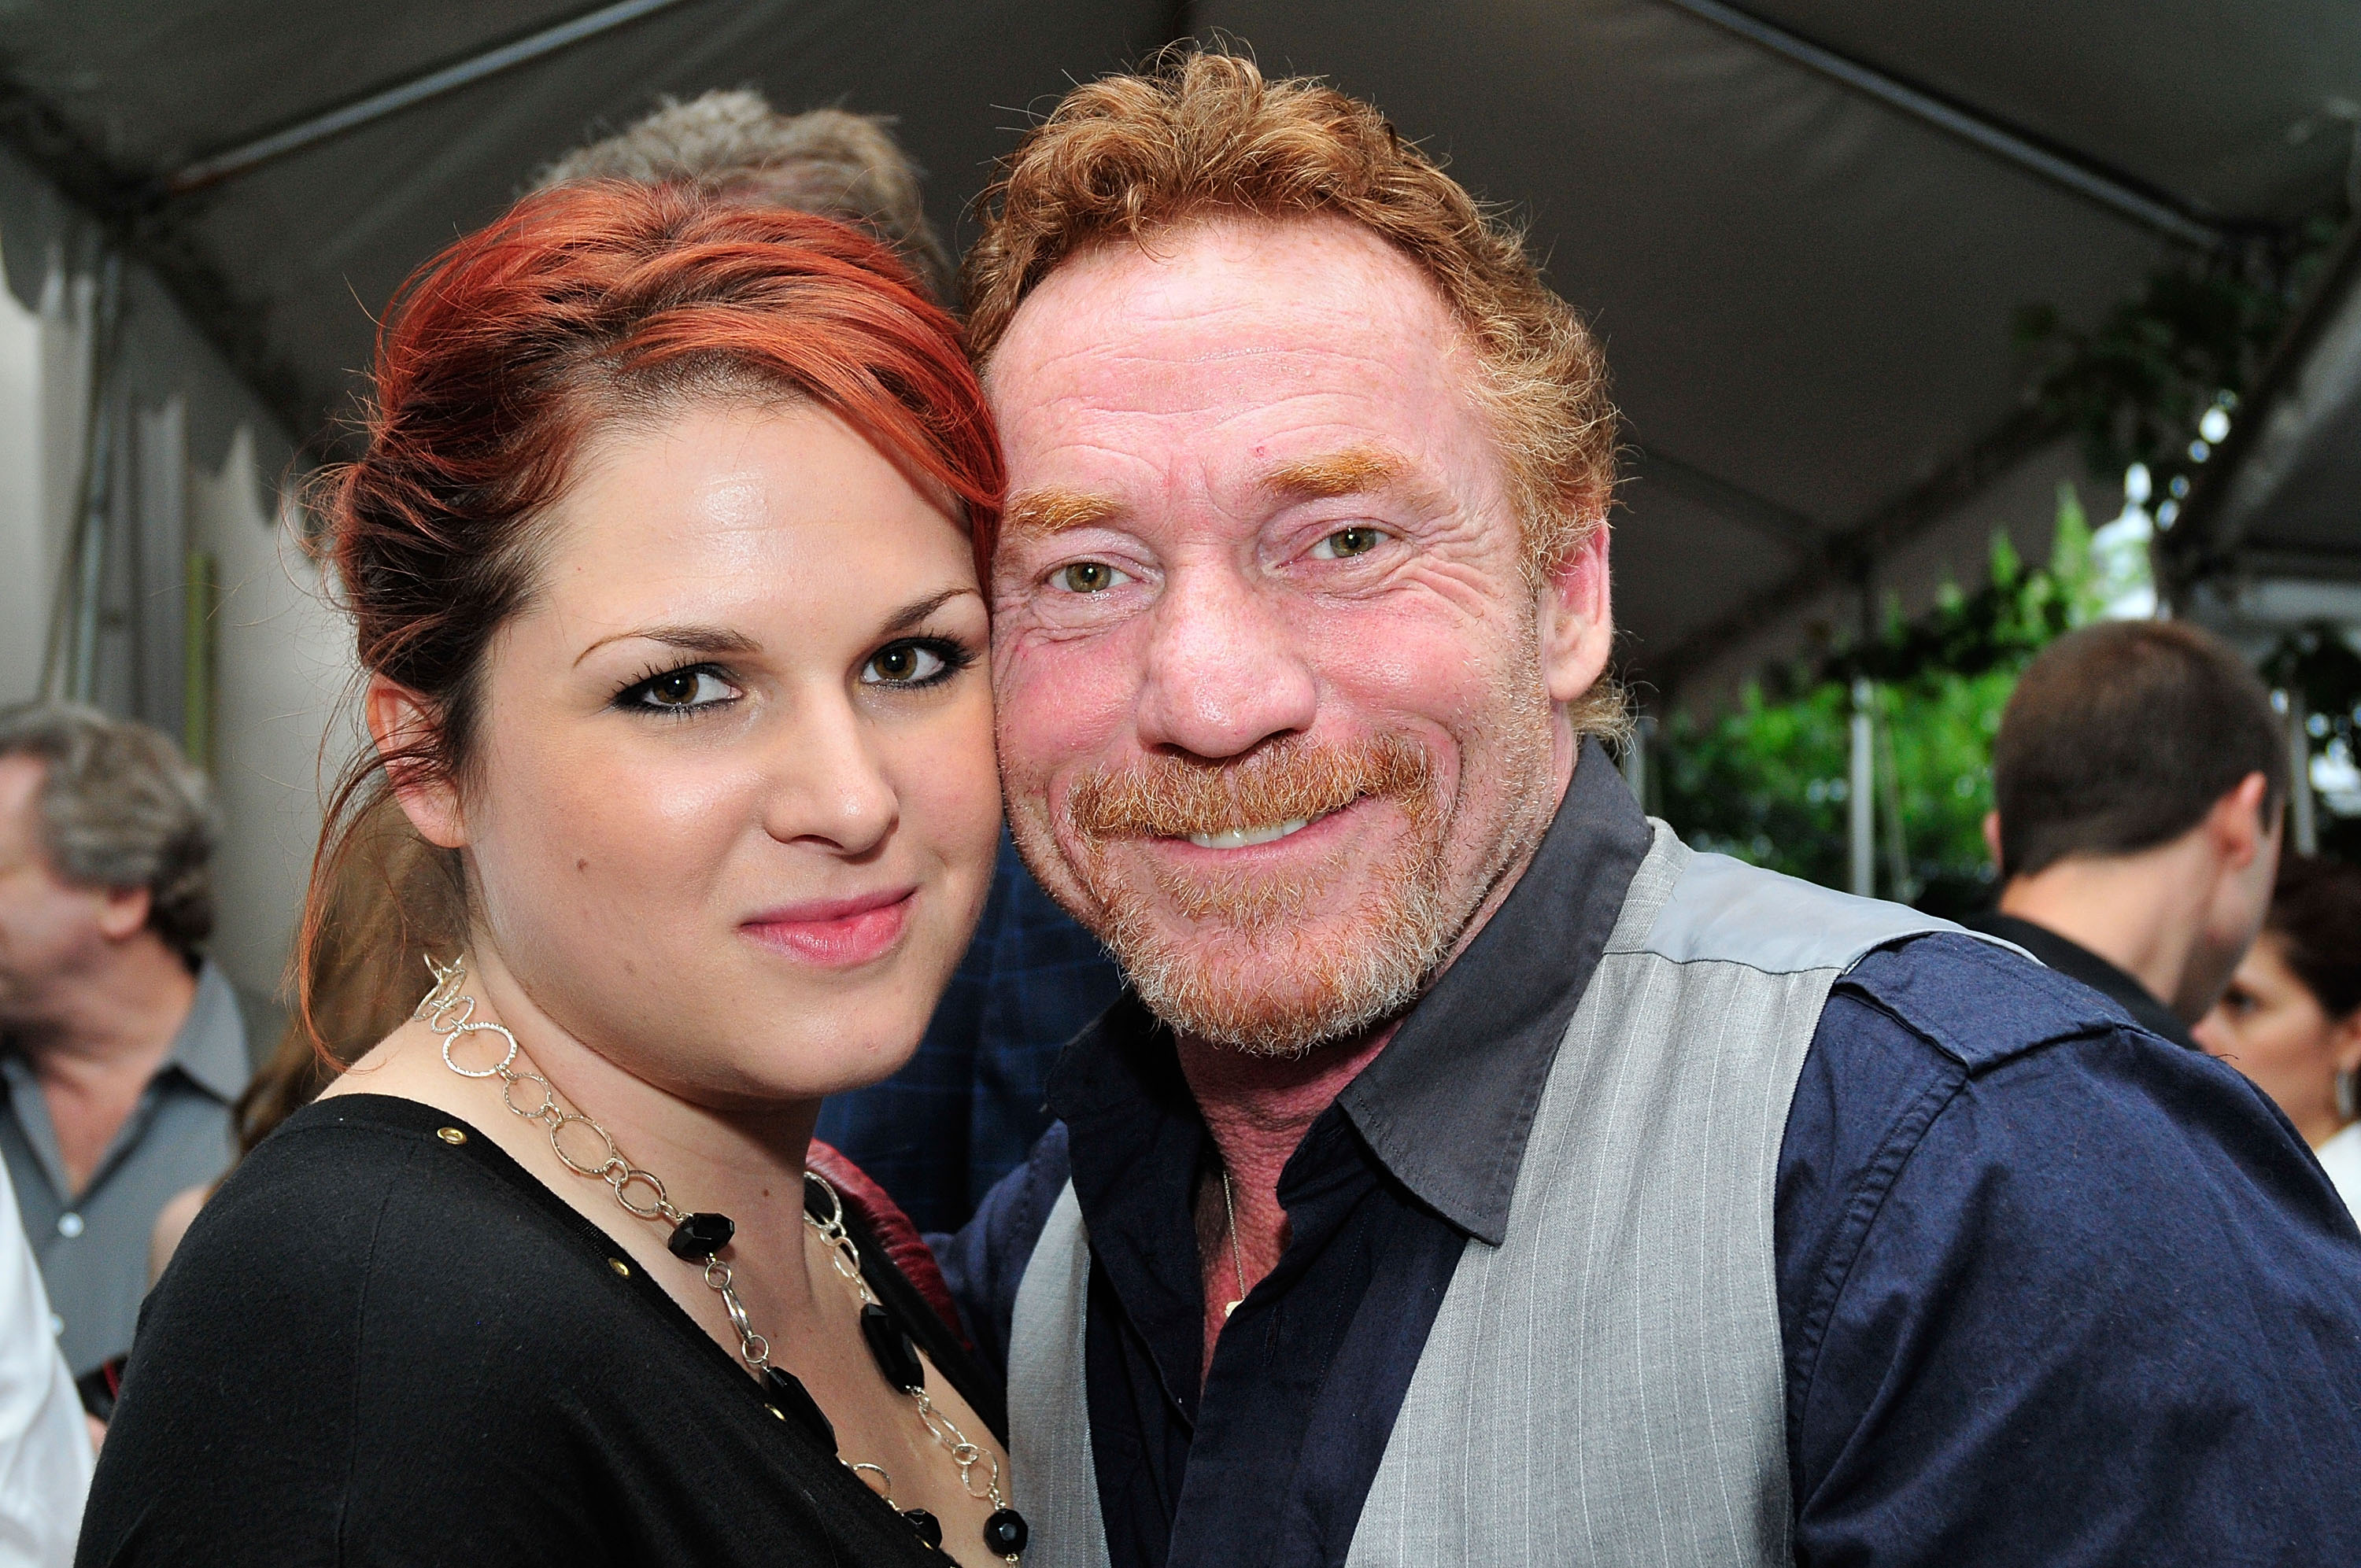 Radio/television personality and comedian Danny Bonaduce poses with fiance' Amy Railsback at the 4th annual Great Chefs Event Benefiting Alex's Lemonade Stand Foundation at Osteria Restaurant on June 17, 2009, in Philadelphia, Pennsylvania. | Source: Getty Images